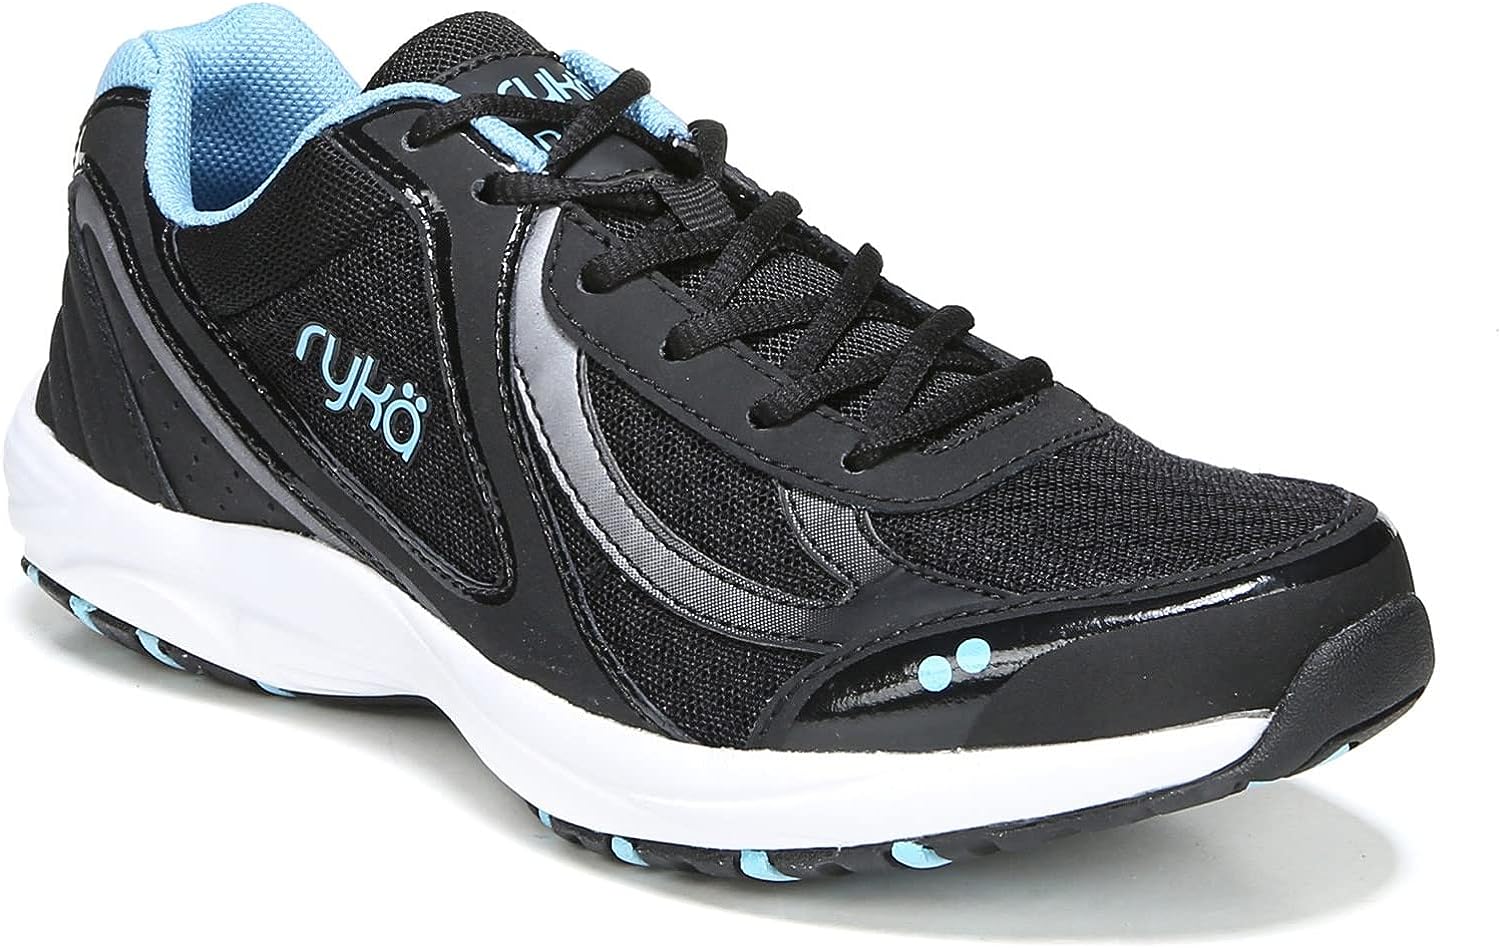 Experience Unmatched Comfort and Style with Ryka Women's Dash 3 Walking Sneaker